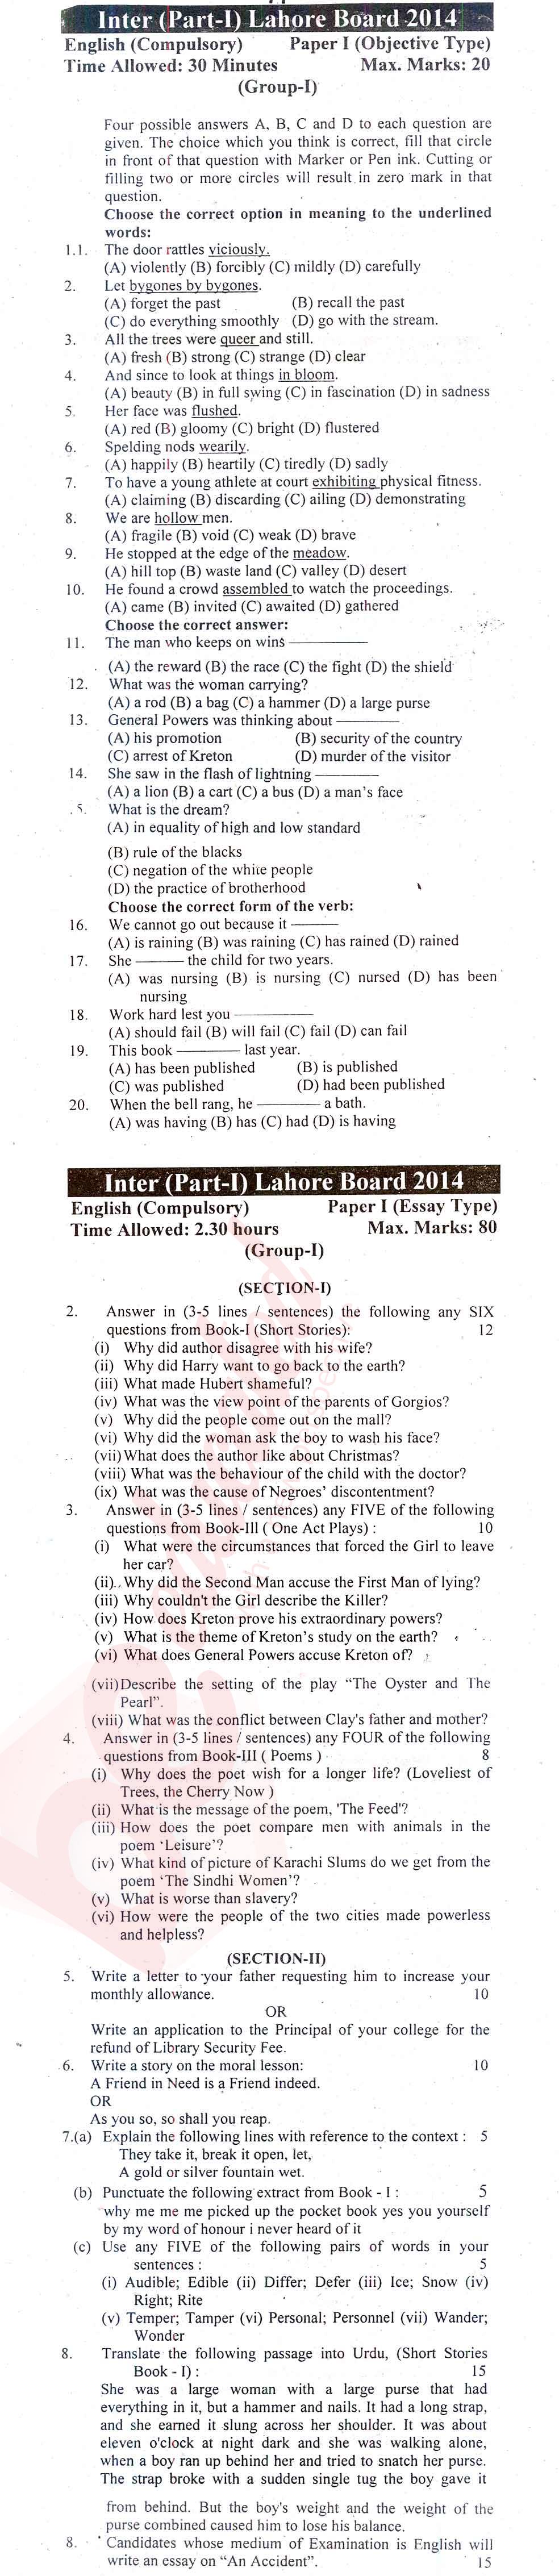 English 11th class Past Paper Group 1 BISE Lahore 2014